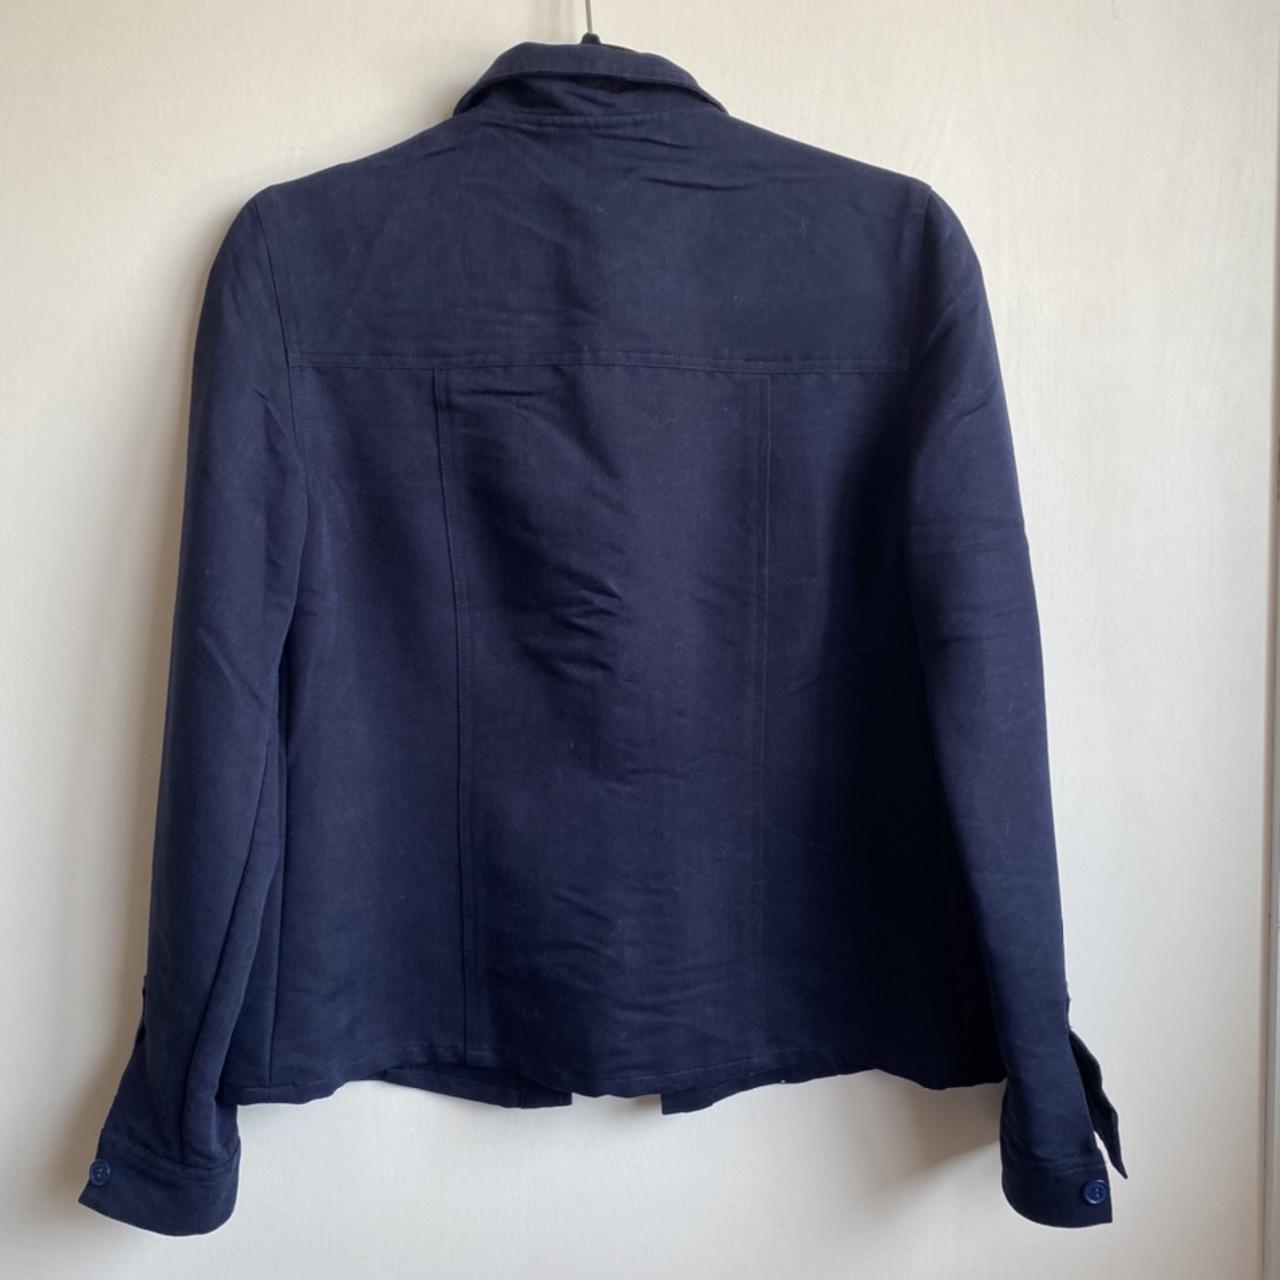 Product Image 2 - Navy blue button up shirt/very